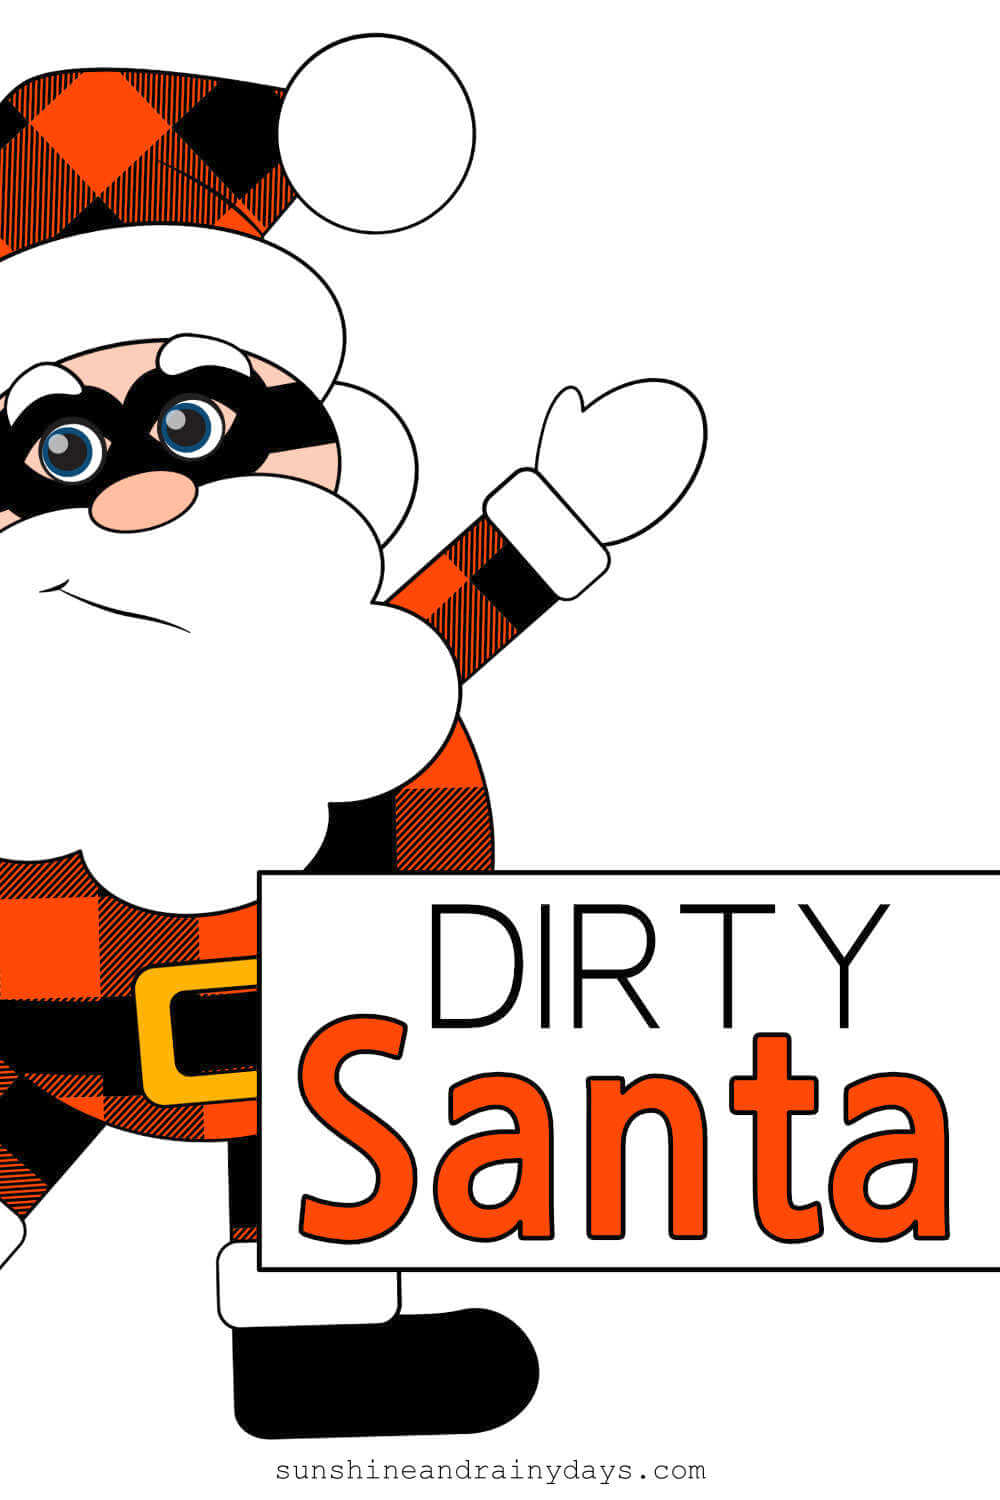 Dirty Santa Rules And Numbers - Sunshine and Rainy Days